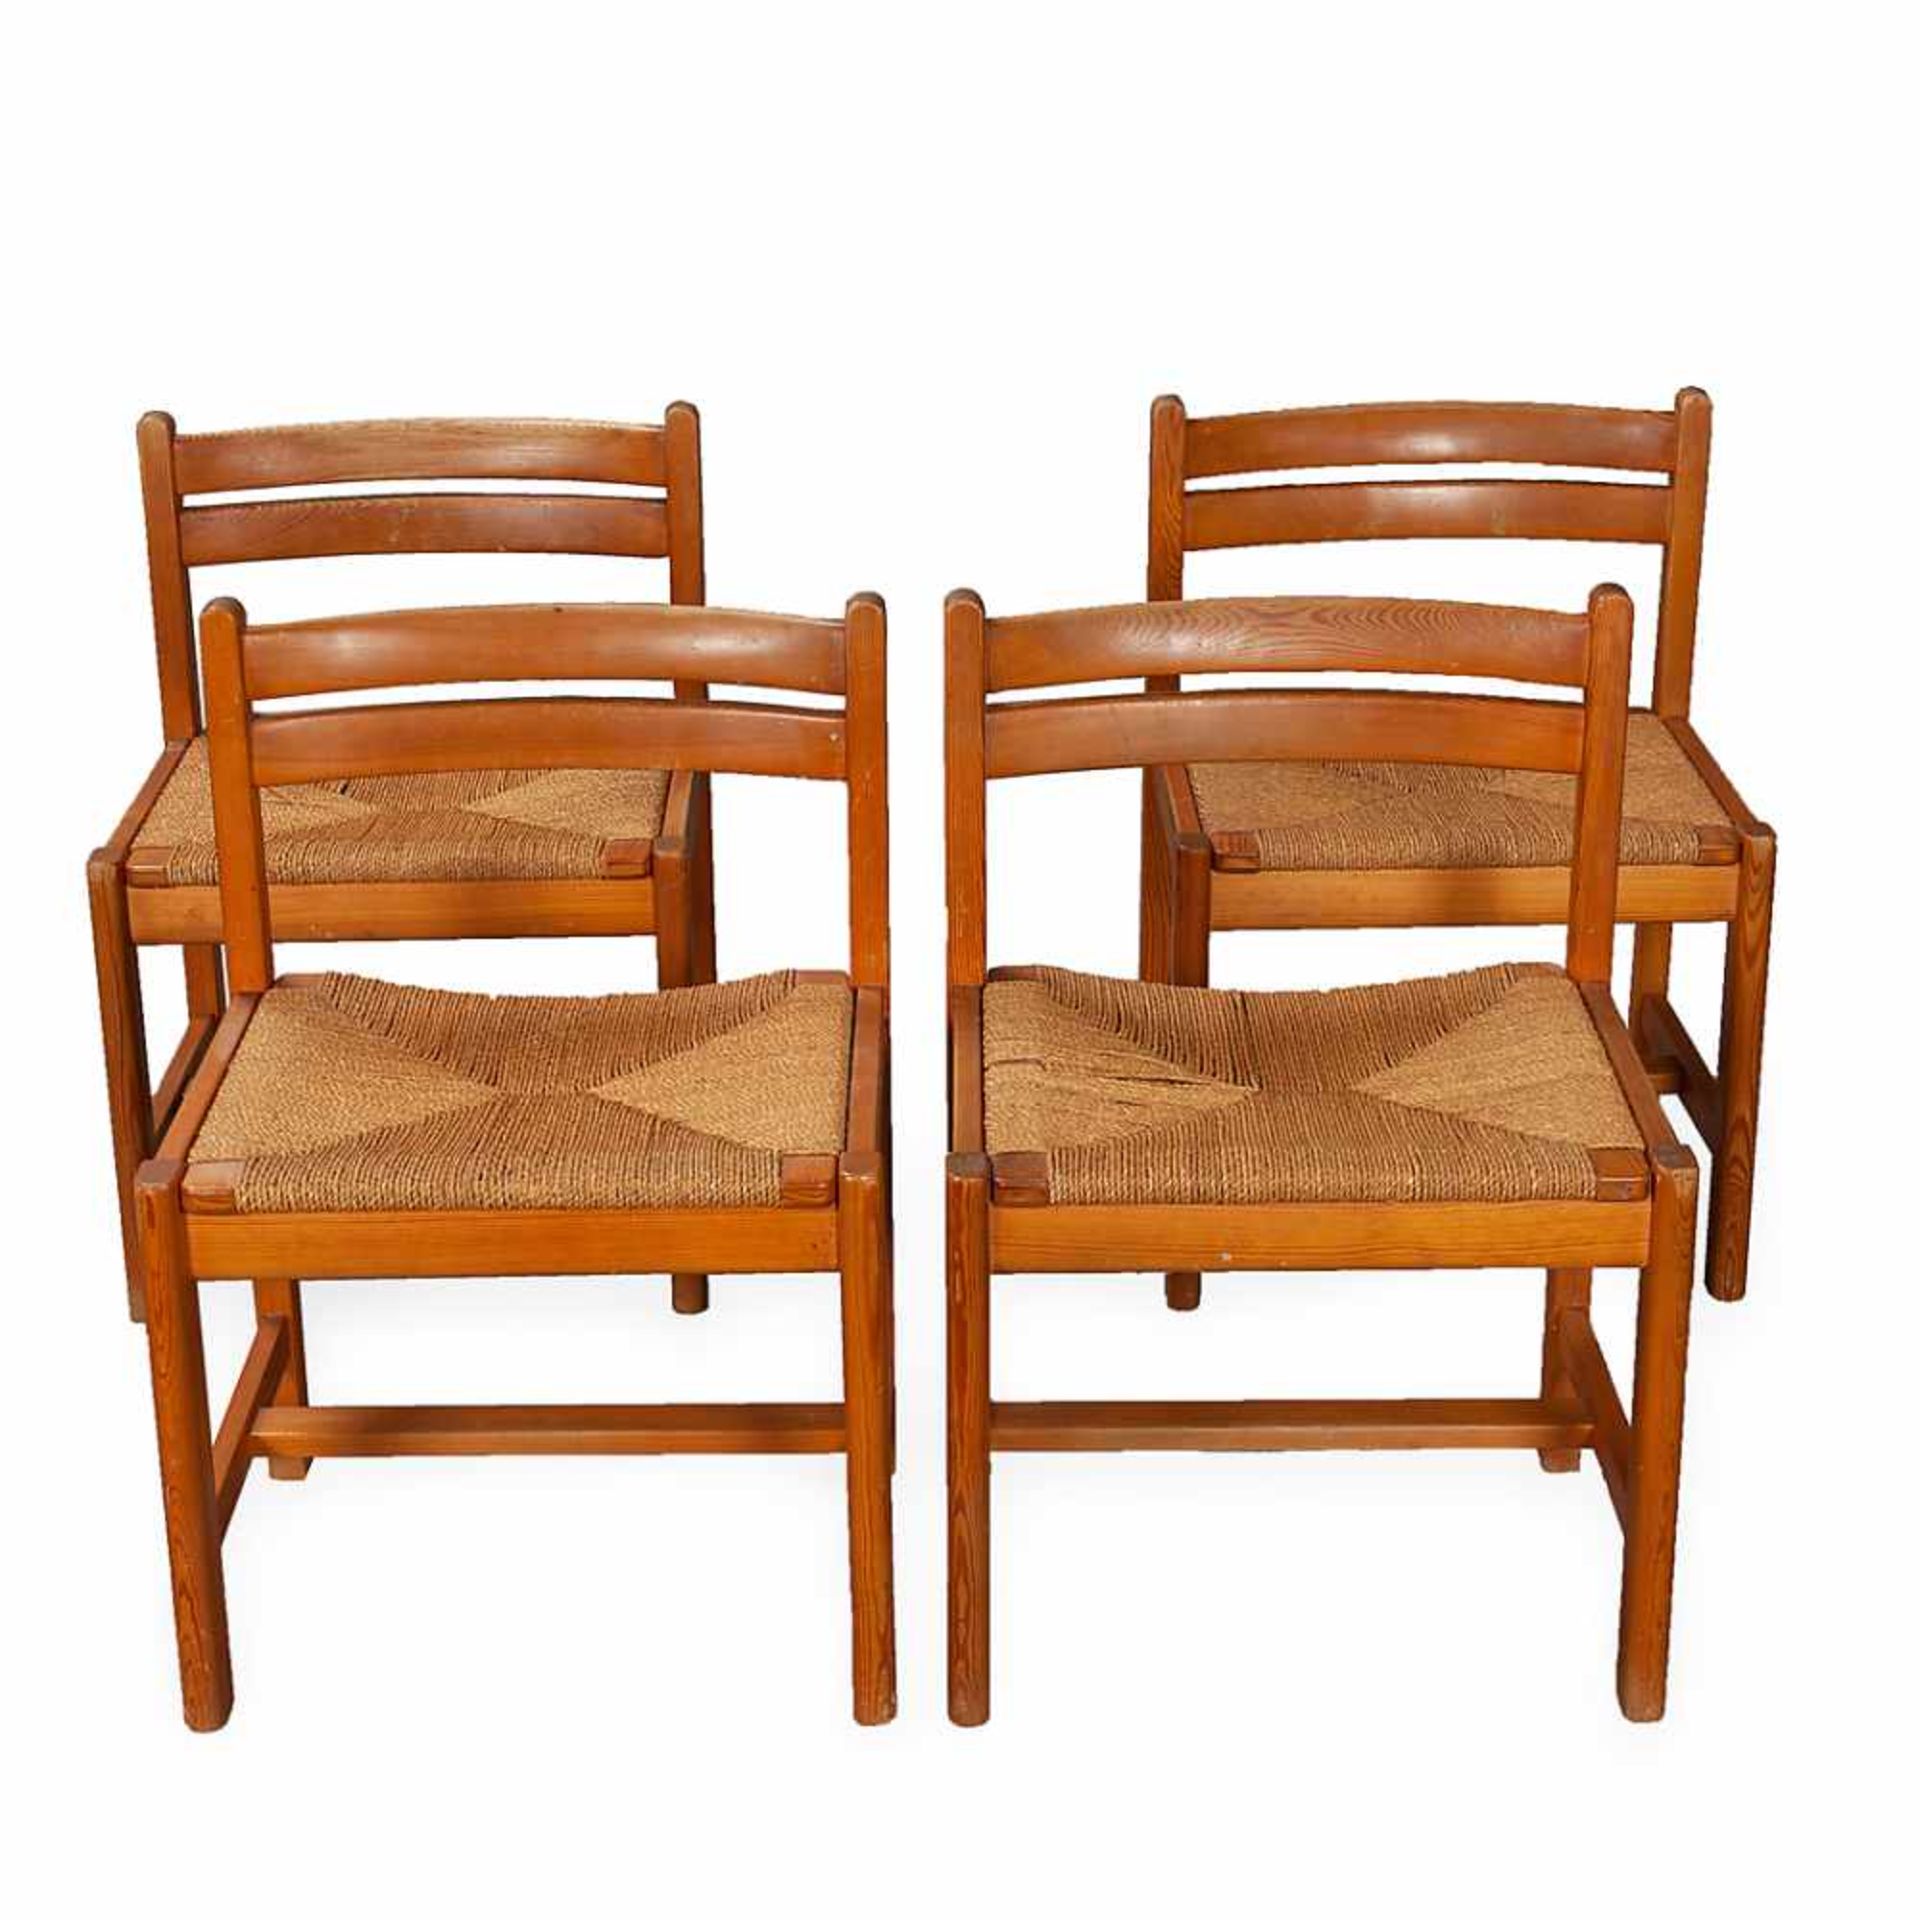 BORGE MOGESEN. Set of four low chairs "Asserbo". Pinewood and original upholstery in rattan.Design